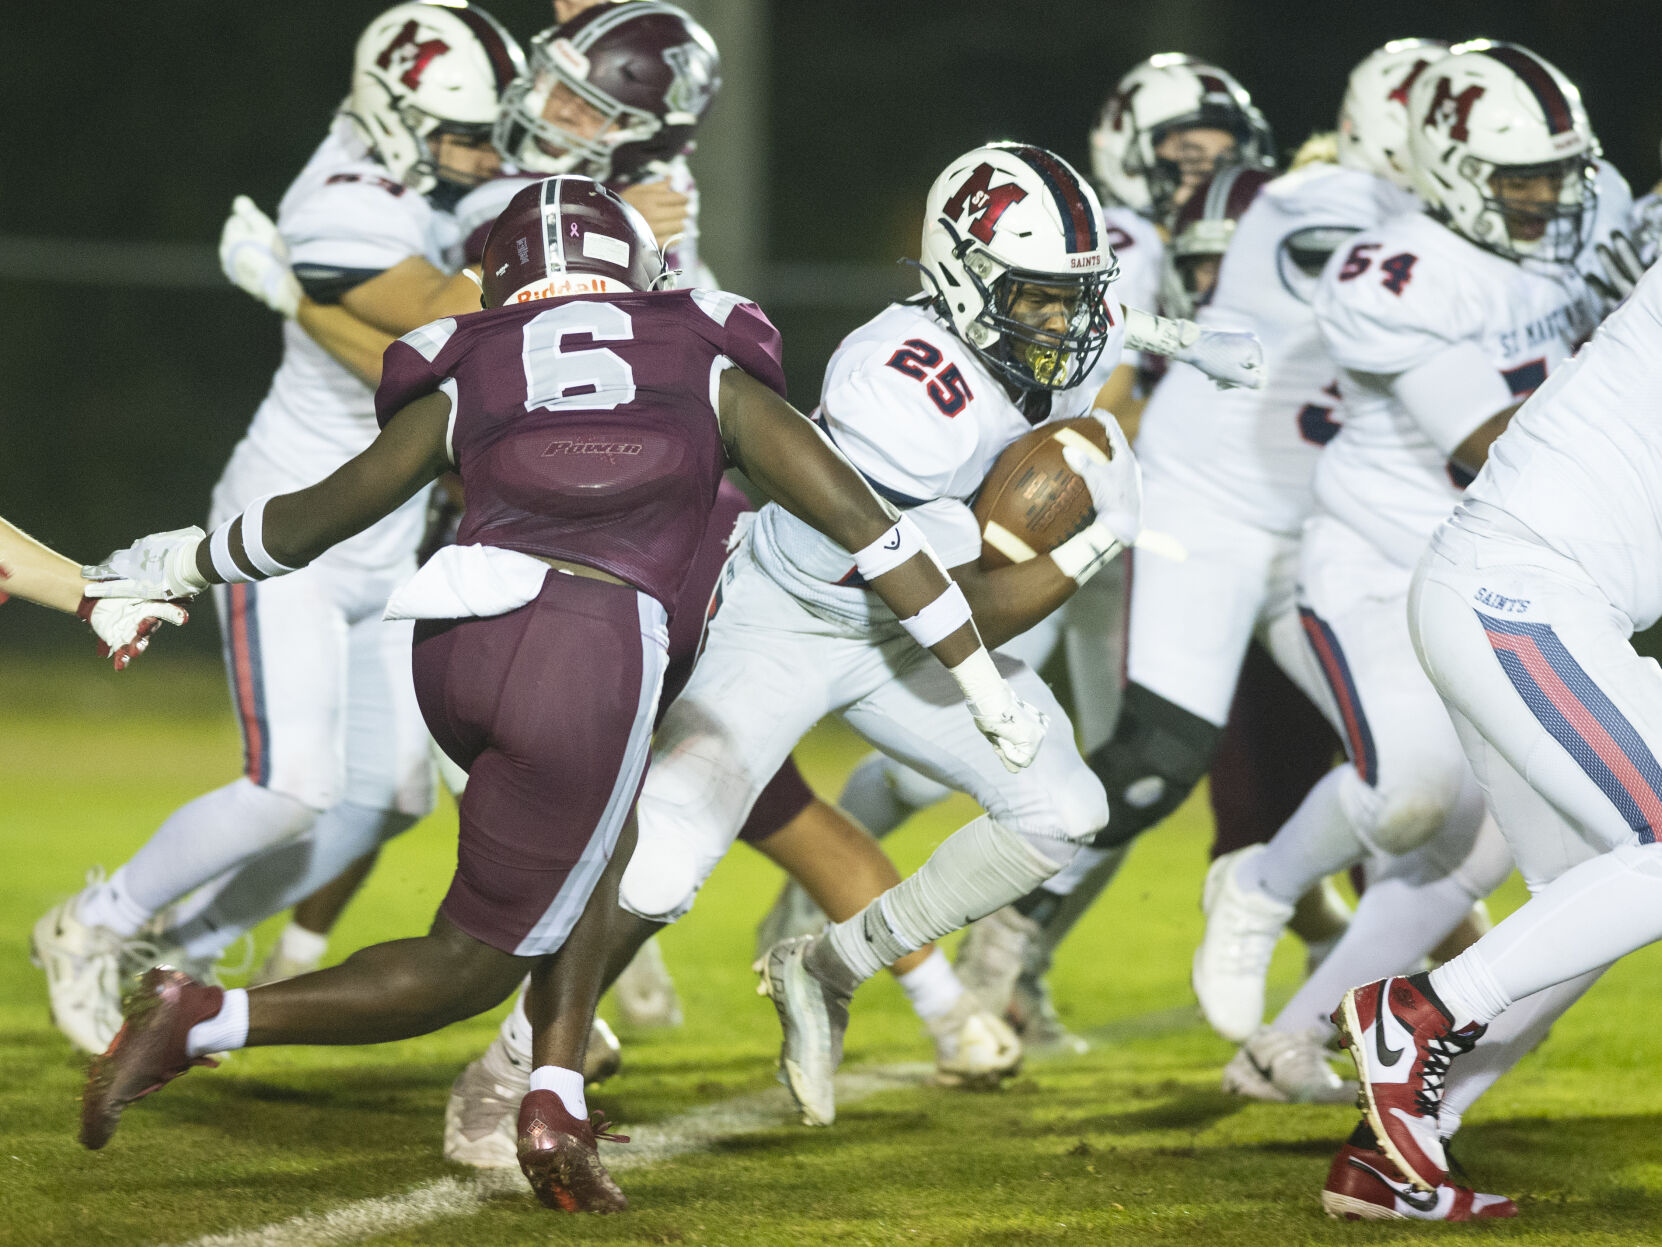 Five rushing touchdowns lift St. Martin’s in playoff win vs. Covenant Christian